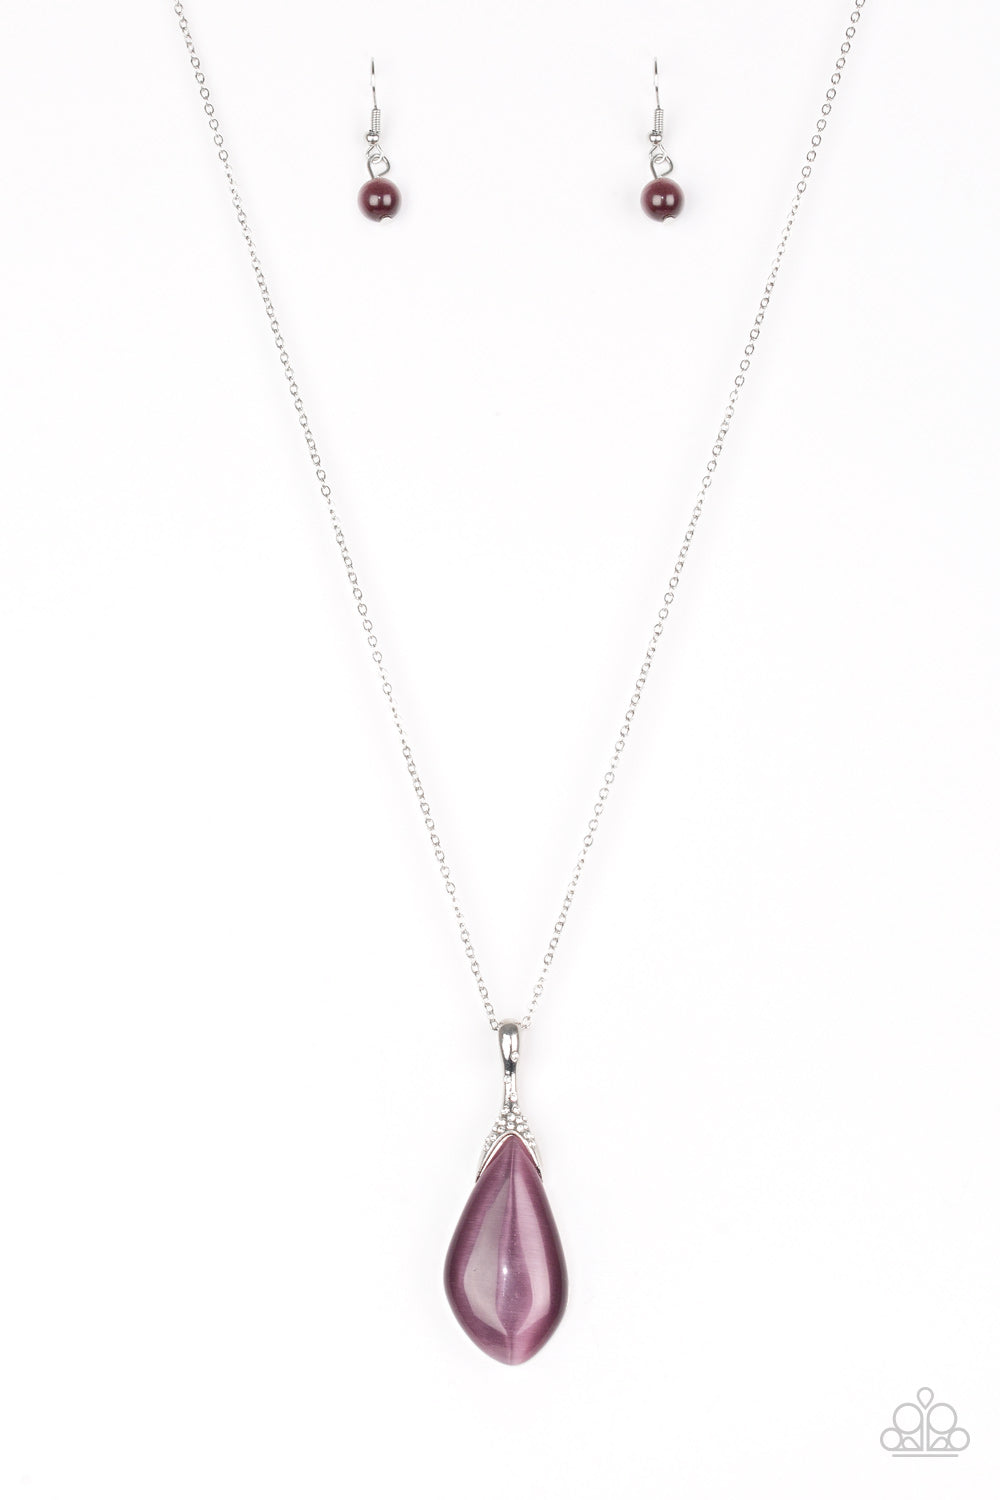 FRIENDS IN GLOW PLACES - PURPLE MOONSTONE NECKLACE